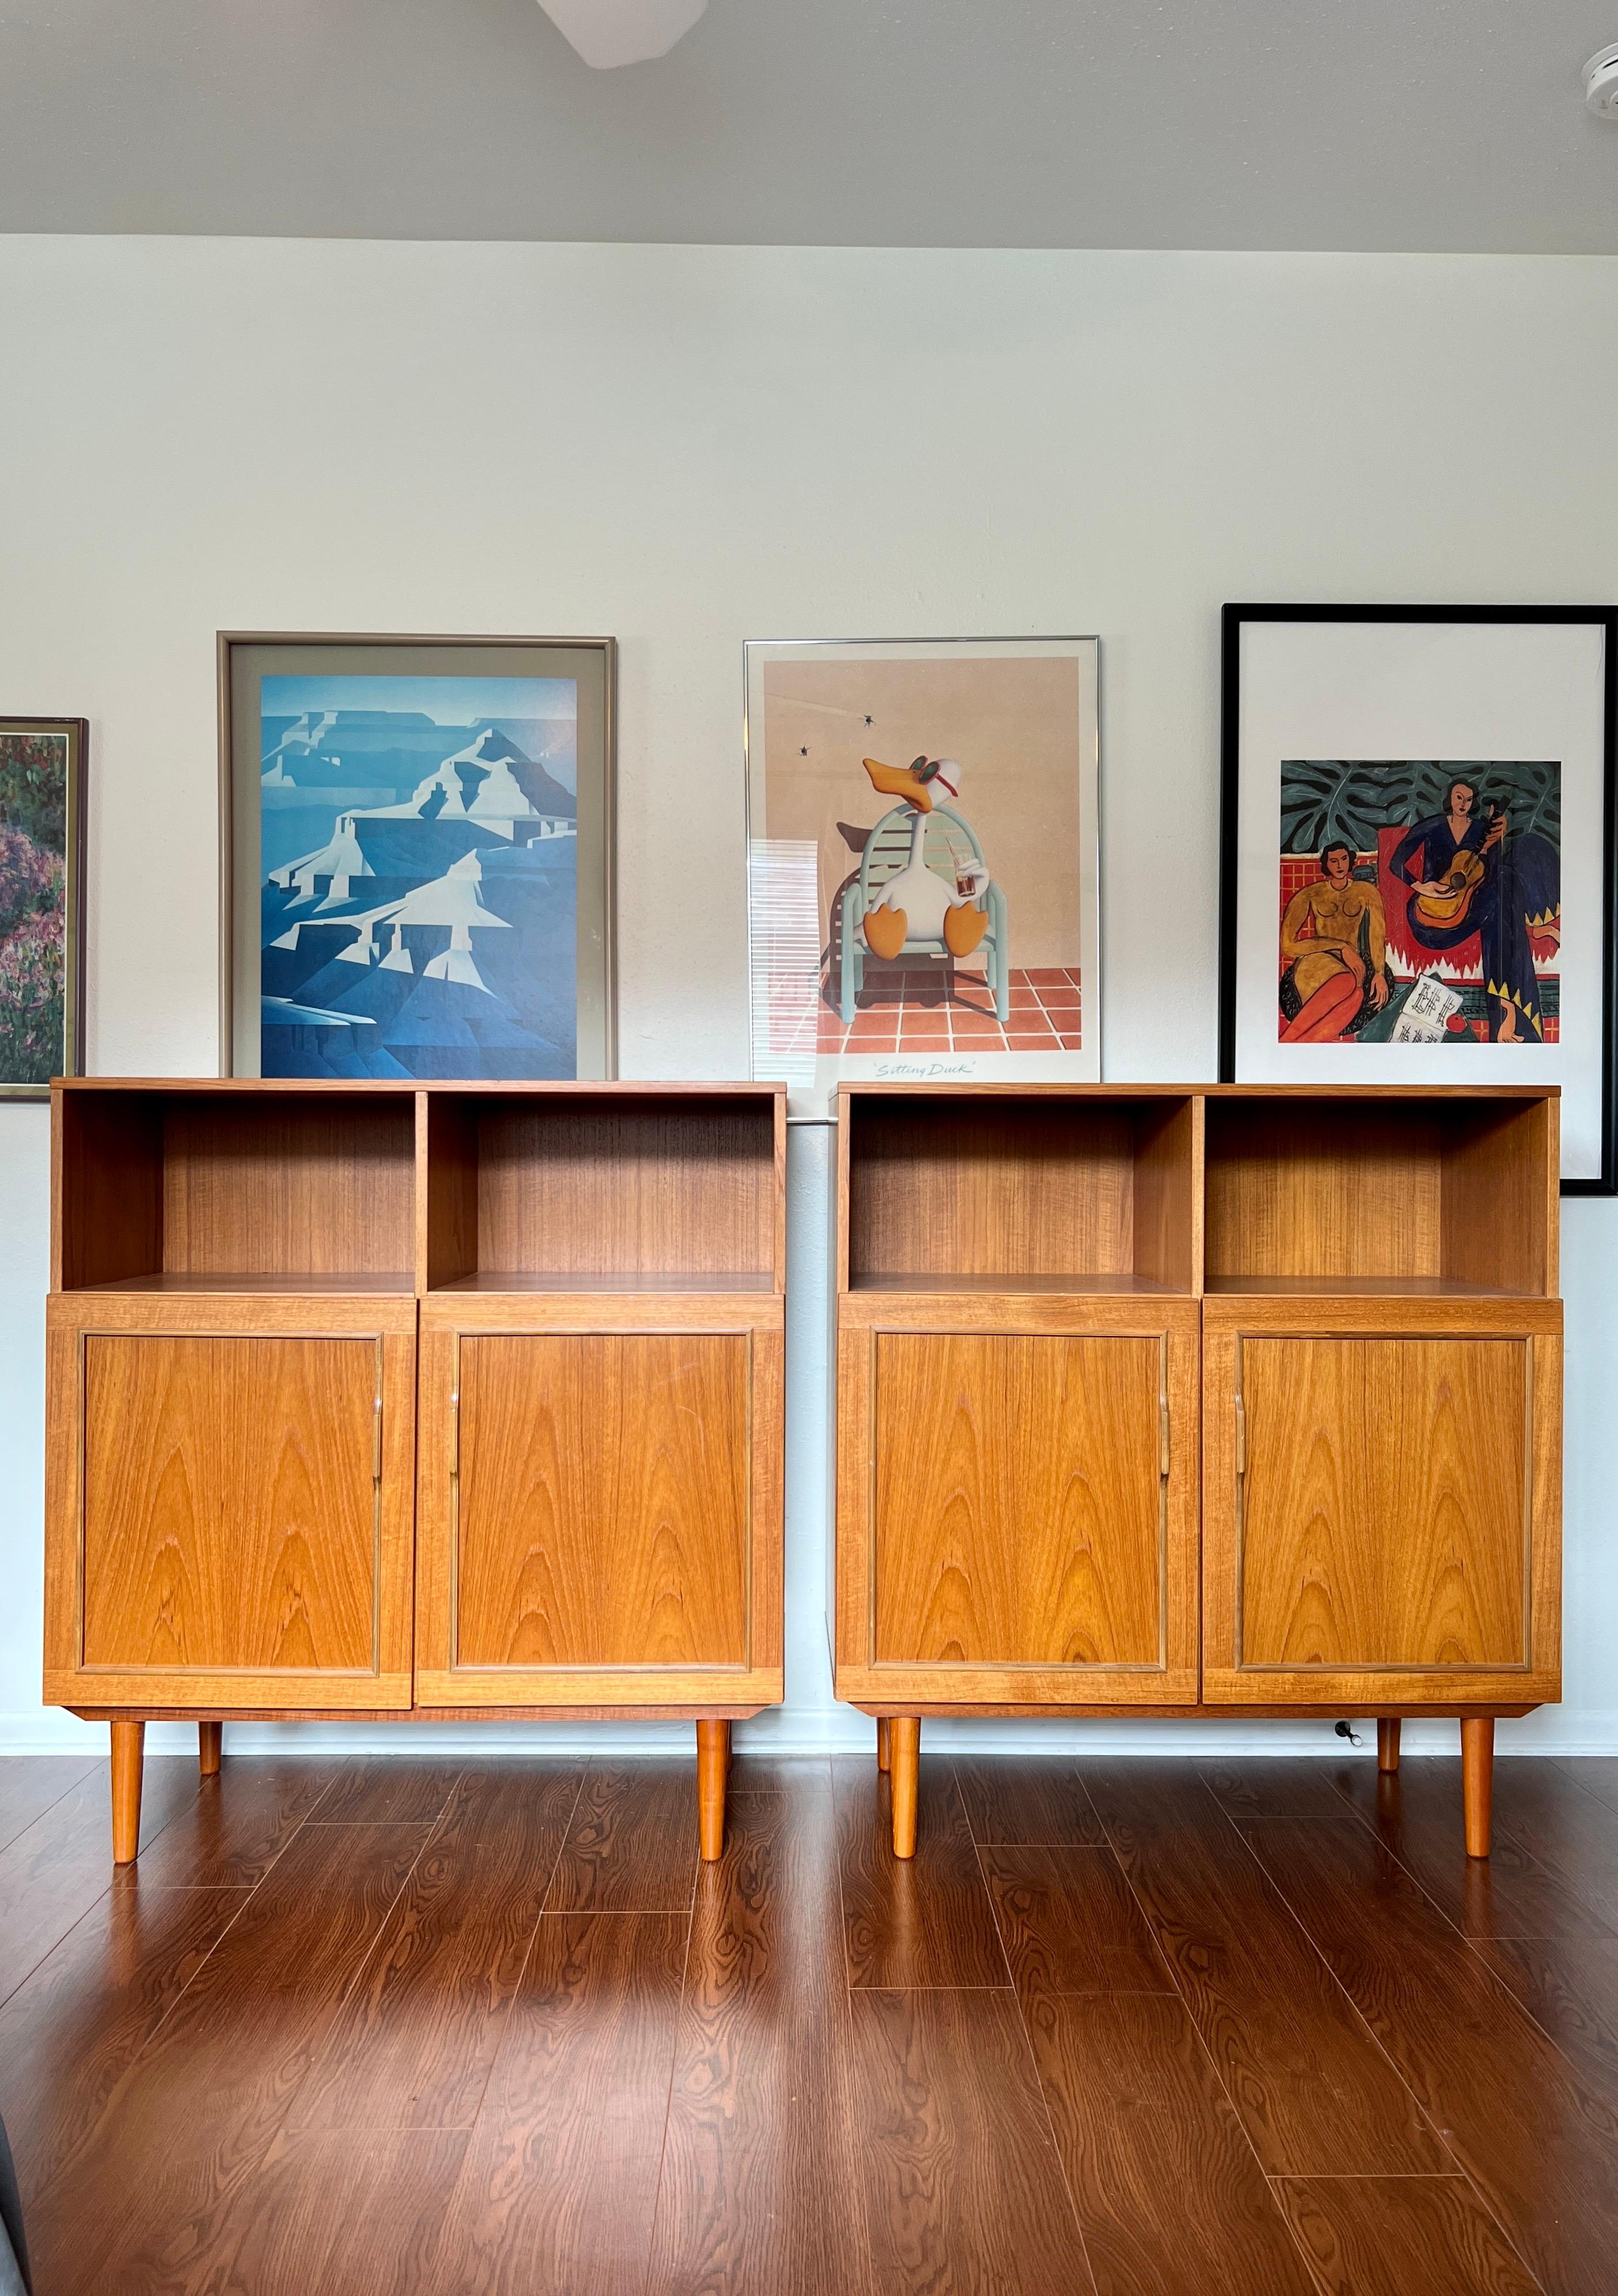 A set of 2 Danish mid century modern double door record / occasional cabinets. I’d like to imagine these at bed side tables in a large primary bedroom. You get so much storage space! Overall in very good original condition. Structurally sound.